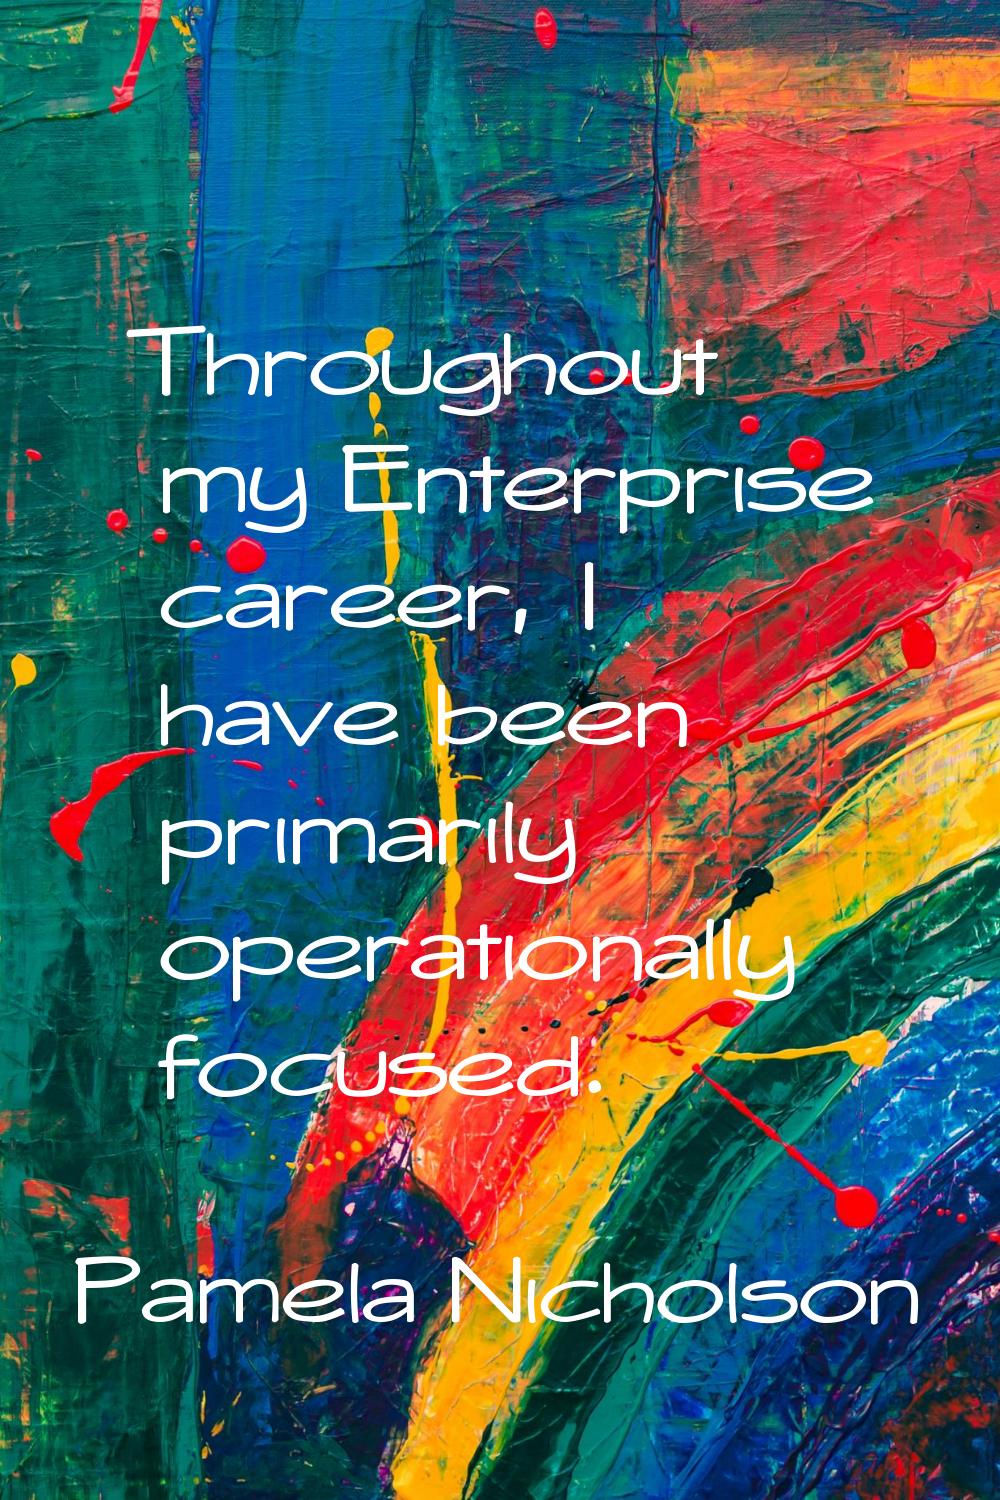 Throughout my Enterprise career, I have been primarily operationally focused.